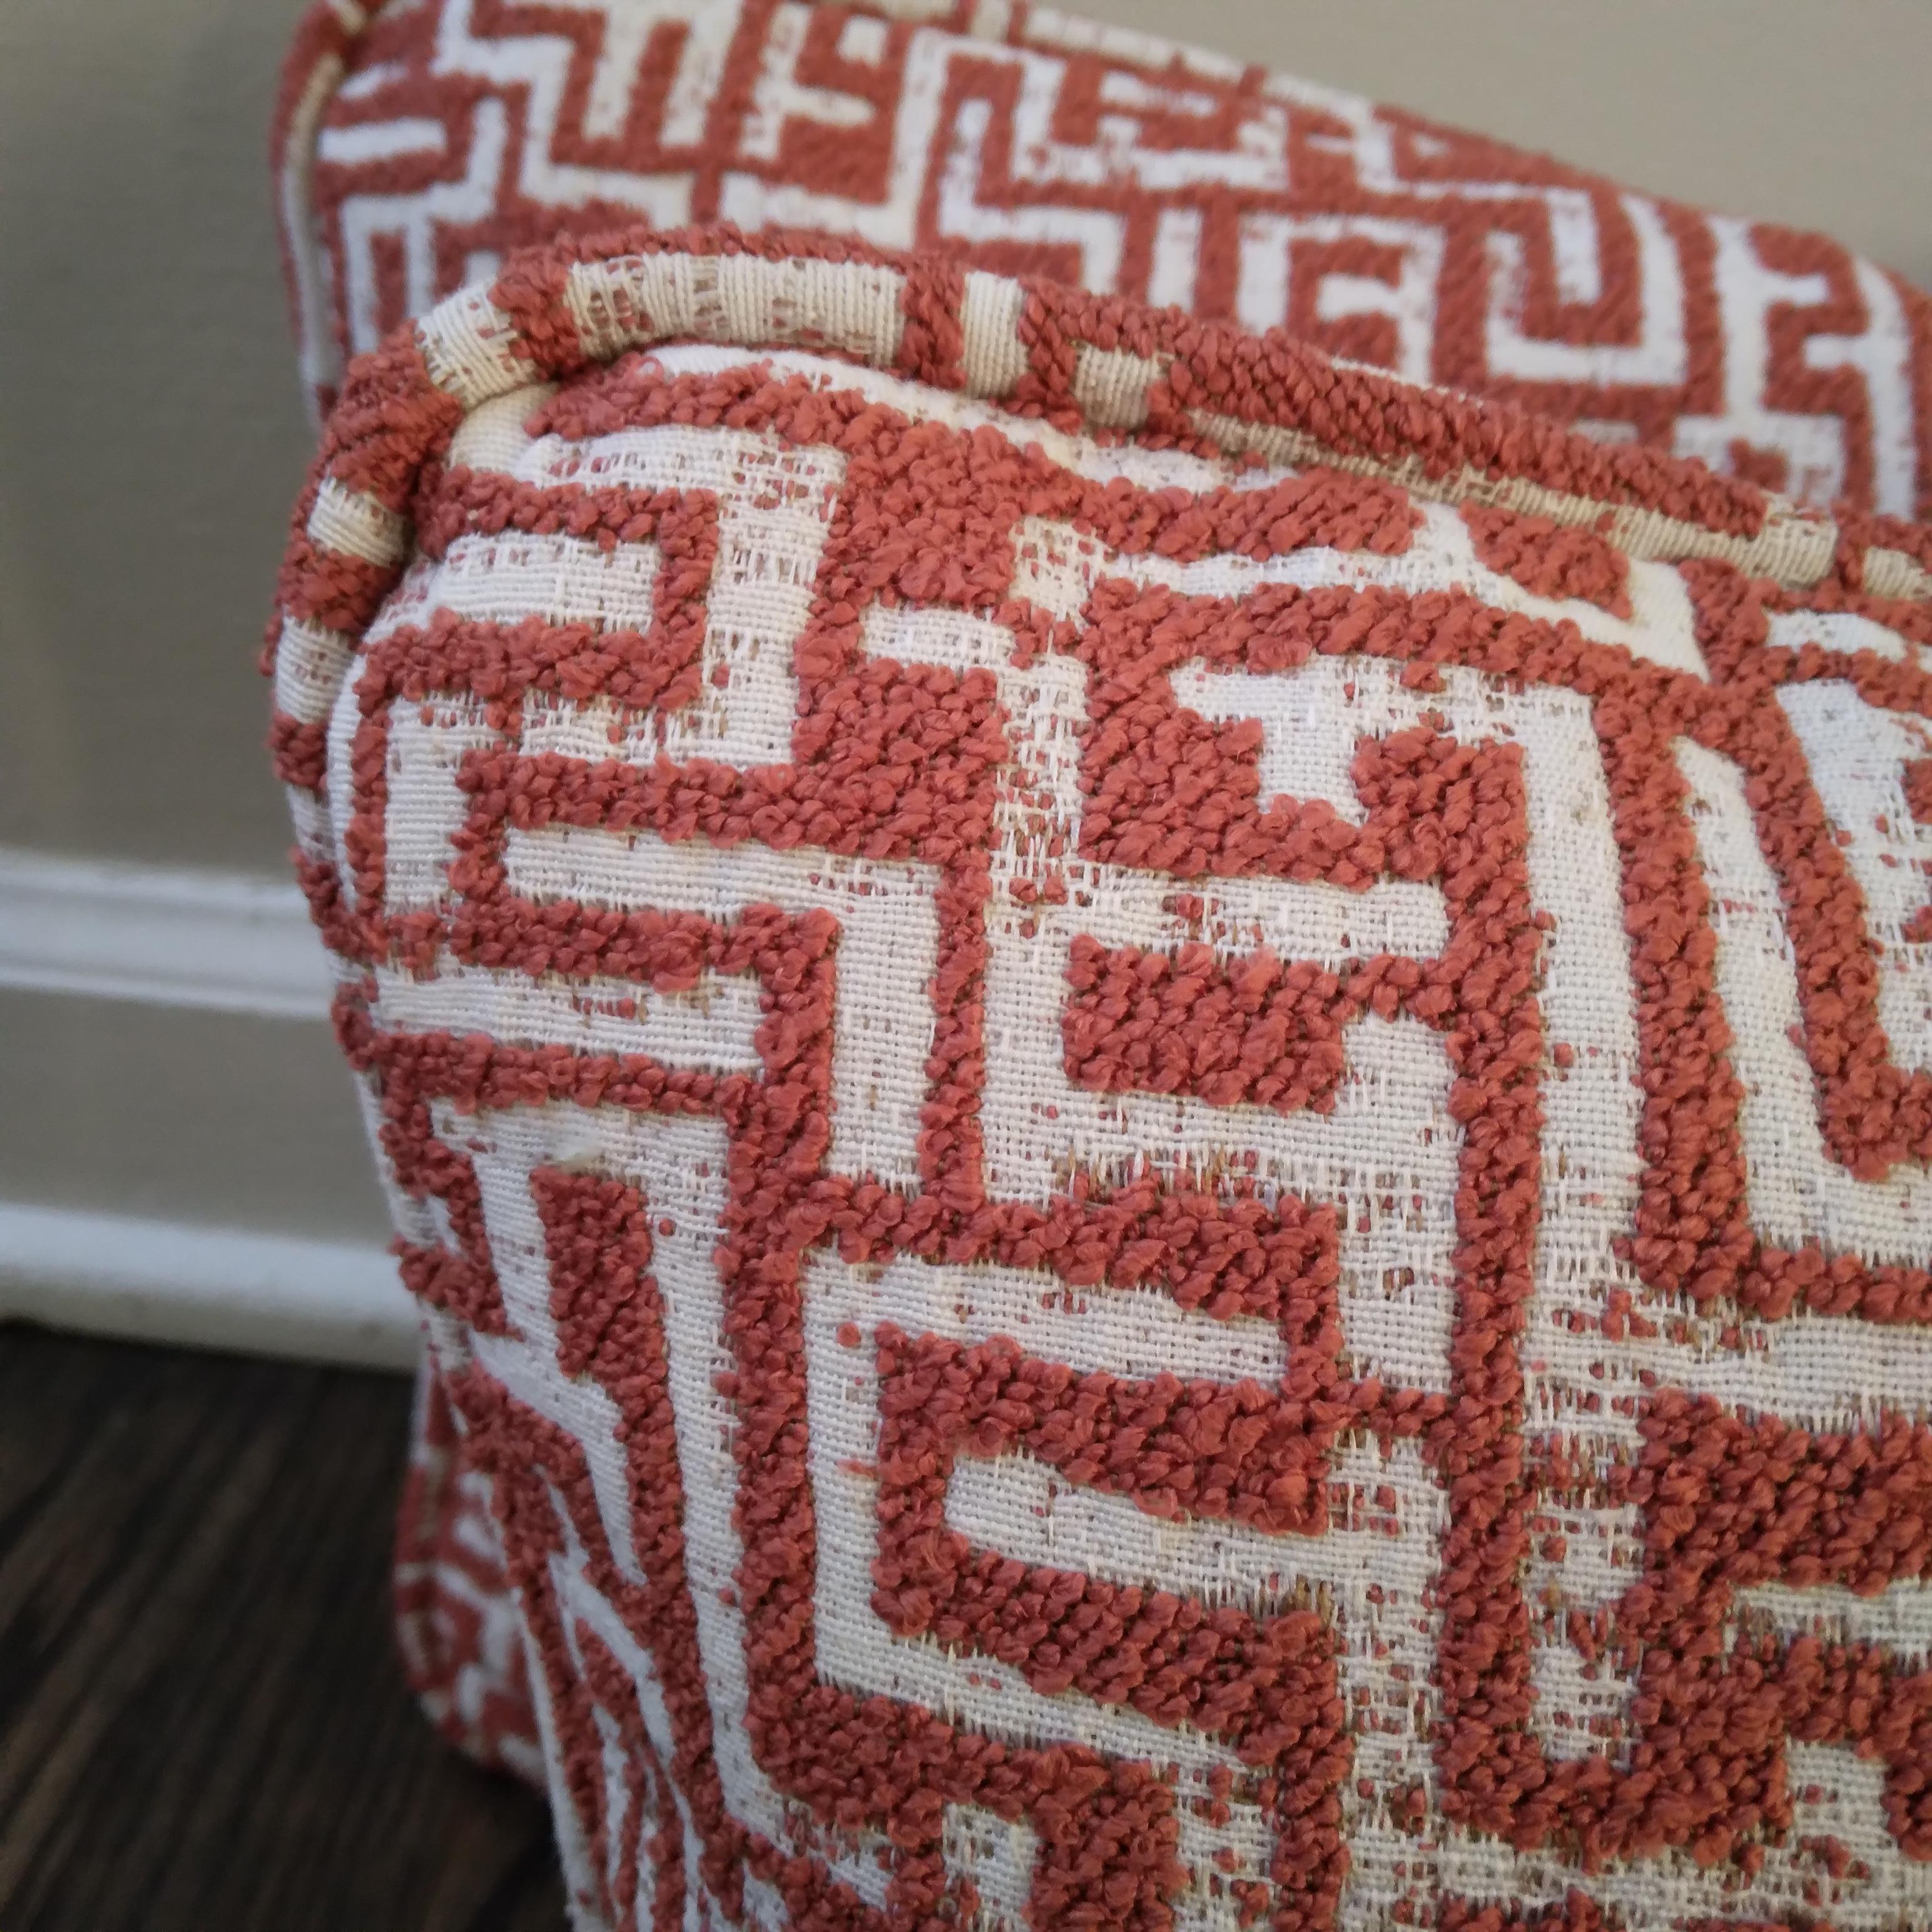 Eclectic and vibrant, these Kuba-inspired, geometric throw pillows are the perfect way to add rich color and chunky texture to your living spaces. Nubby, interconnecting lines of woven textile create an eye-catching effect. The saturated orange is